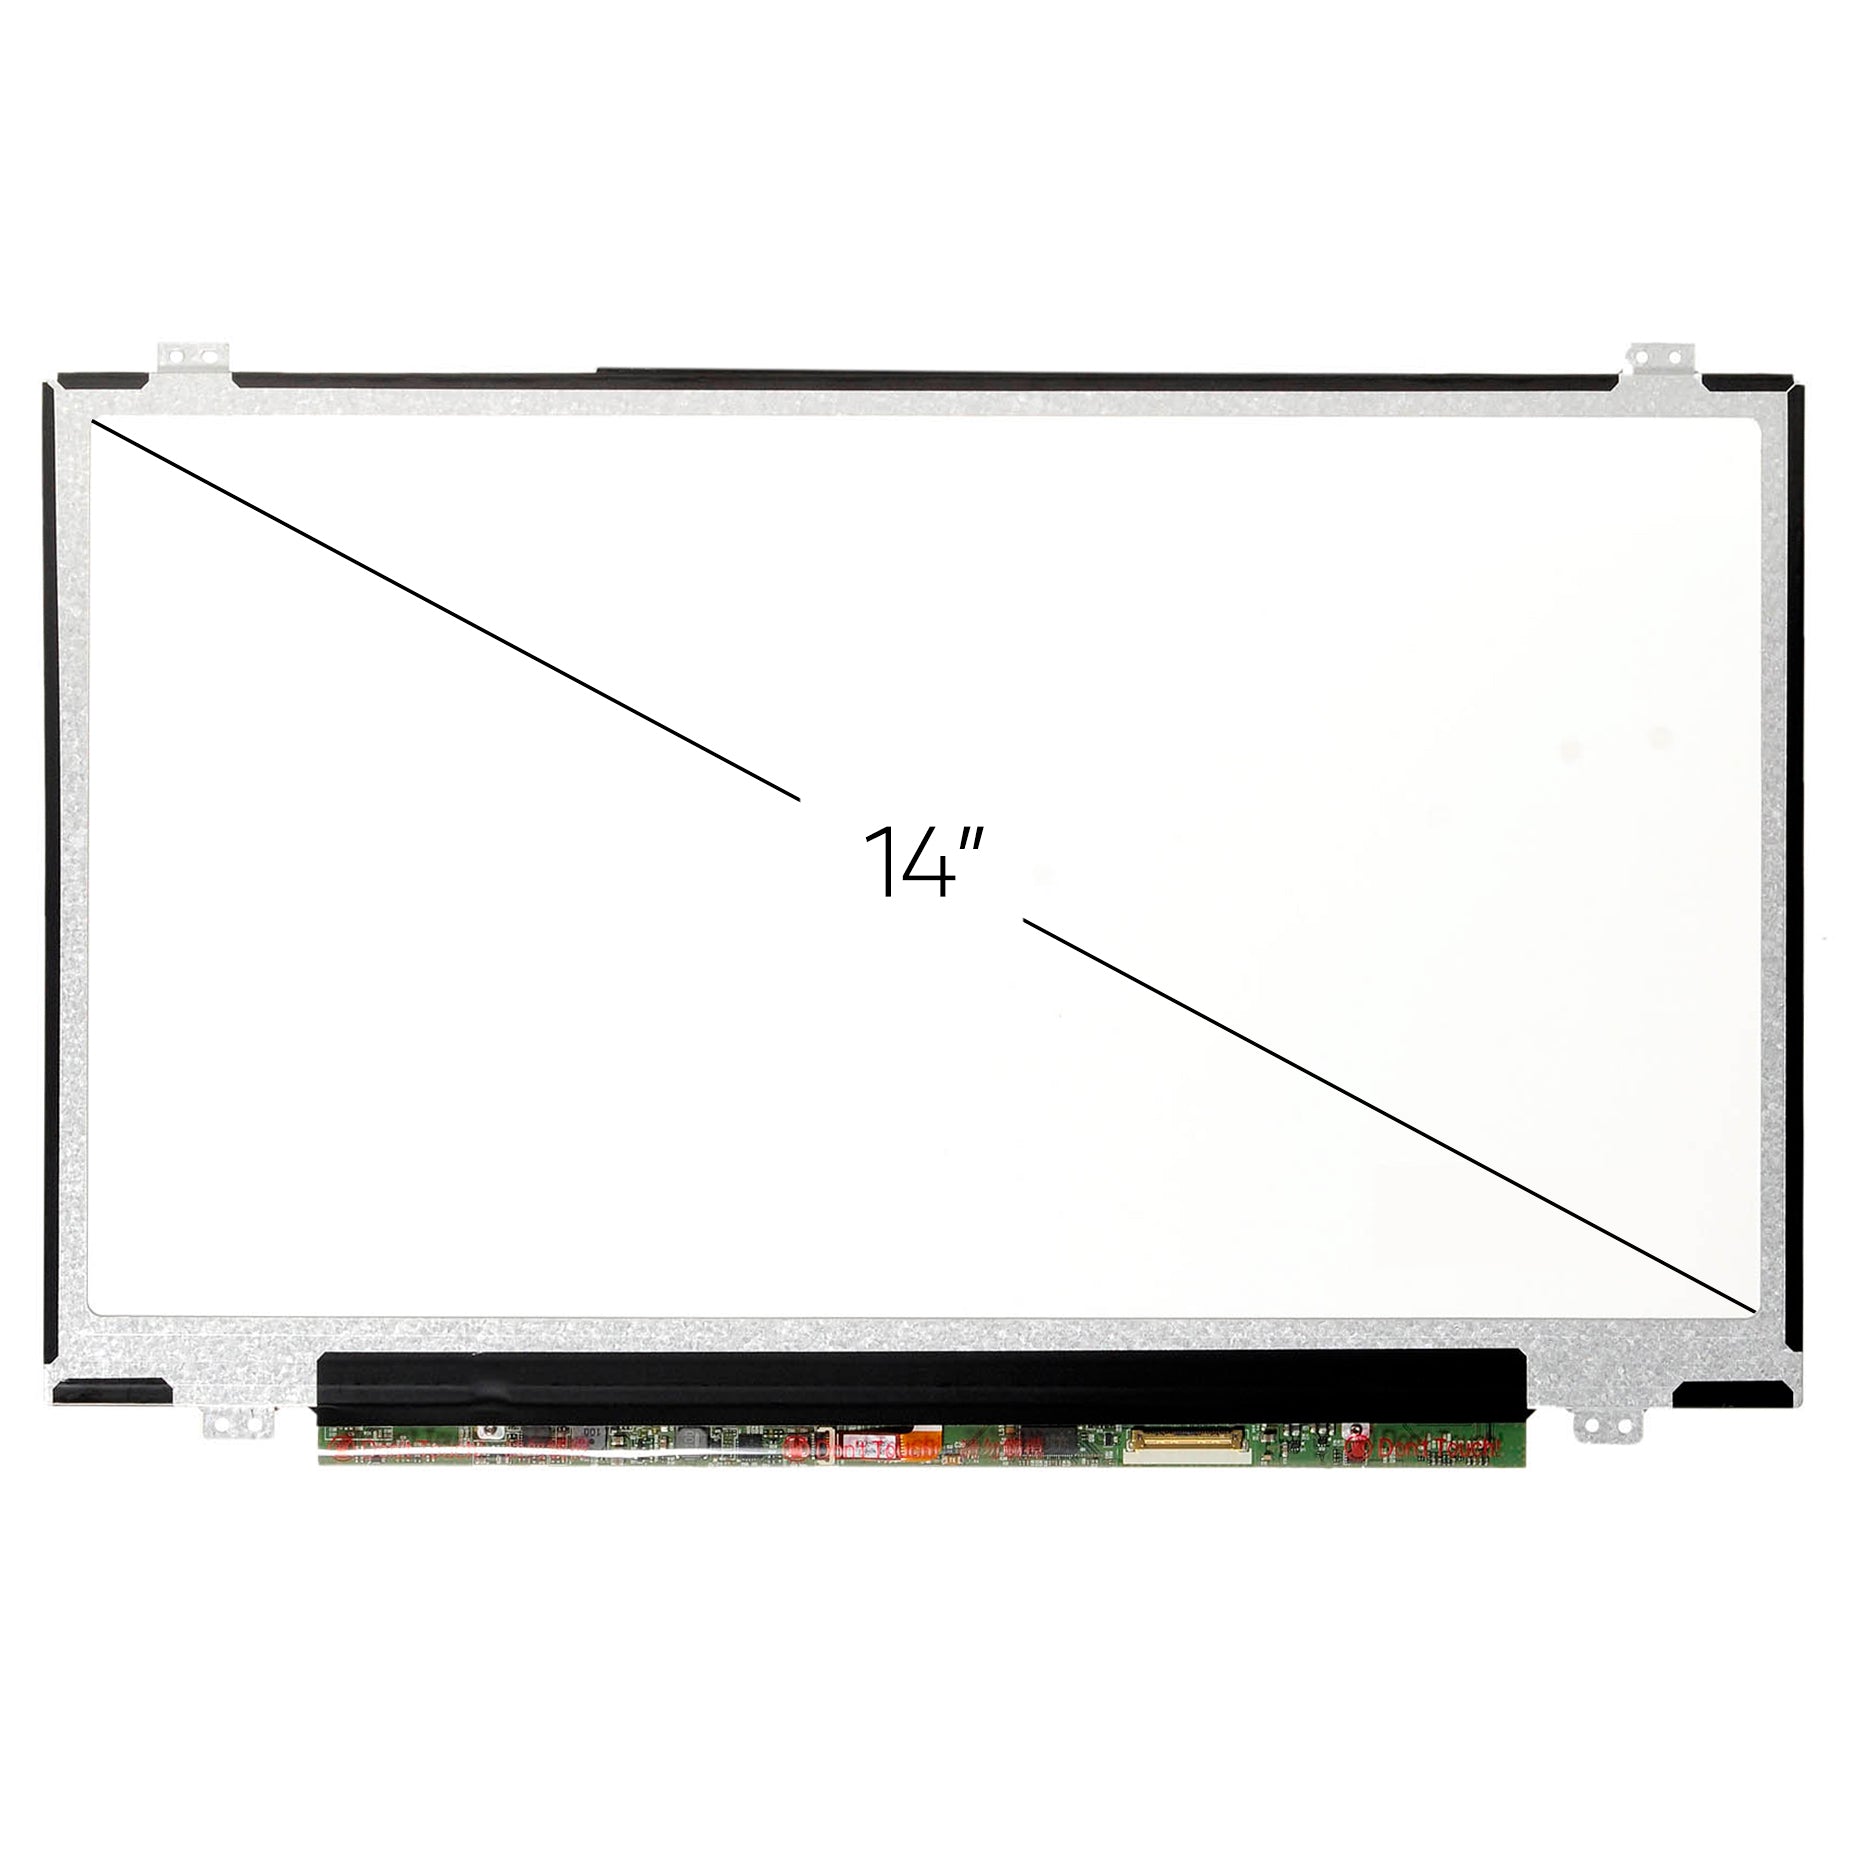 Screen Replacement for Lenovo FRU 00NY657 FHD 1920x1080 IPS Matte LCD LED Display